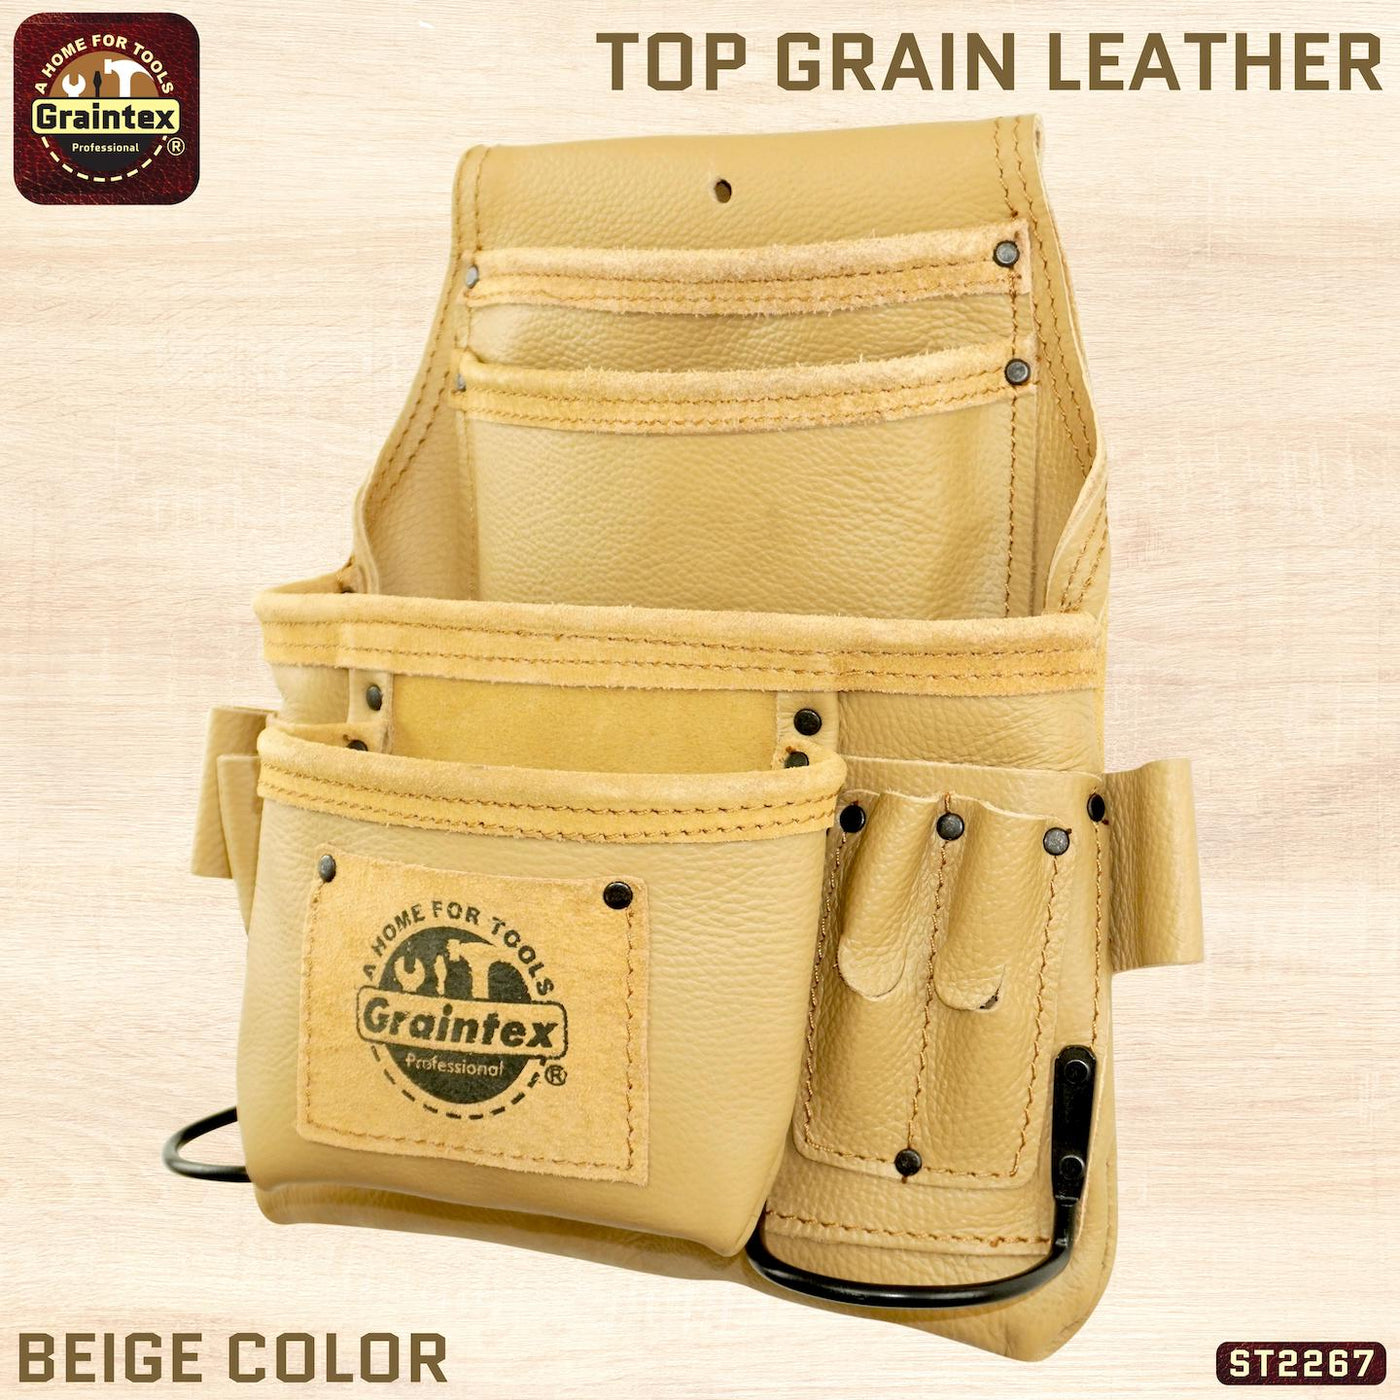 ST2267 :: 10 Pocket Nail & Tool Pouch Beige Color RUGGED Top Grain Leather